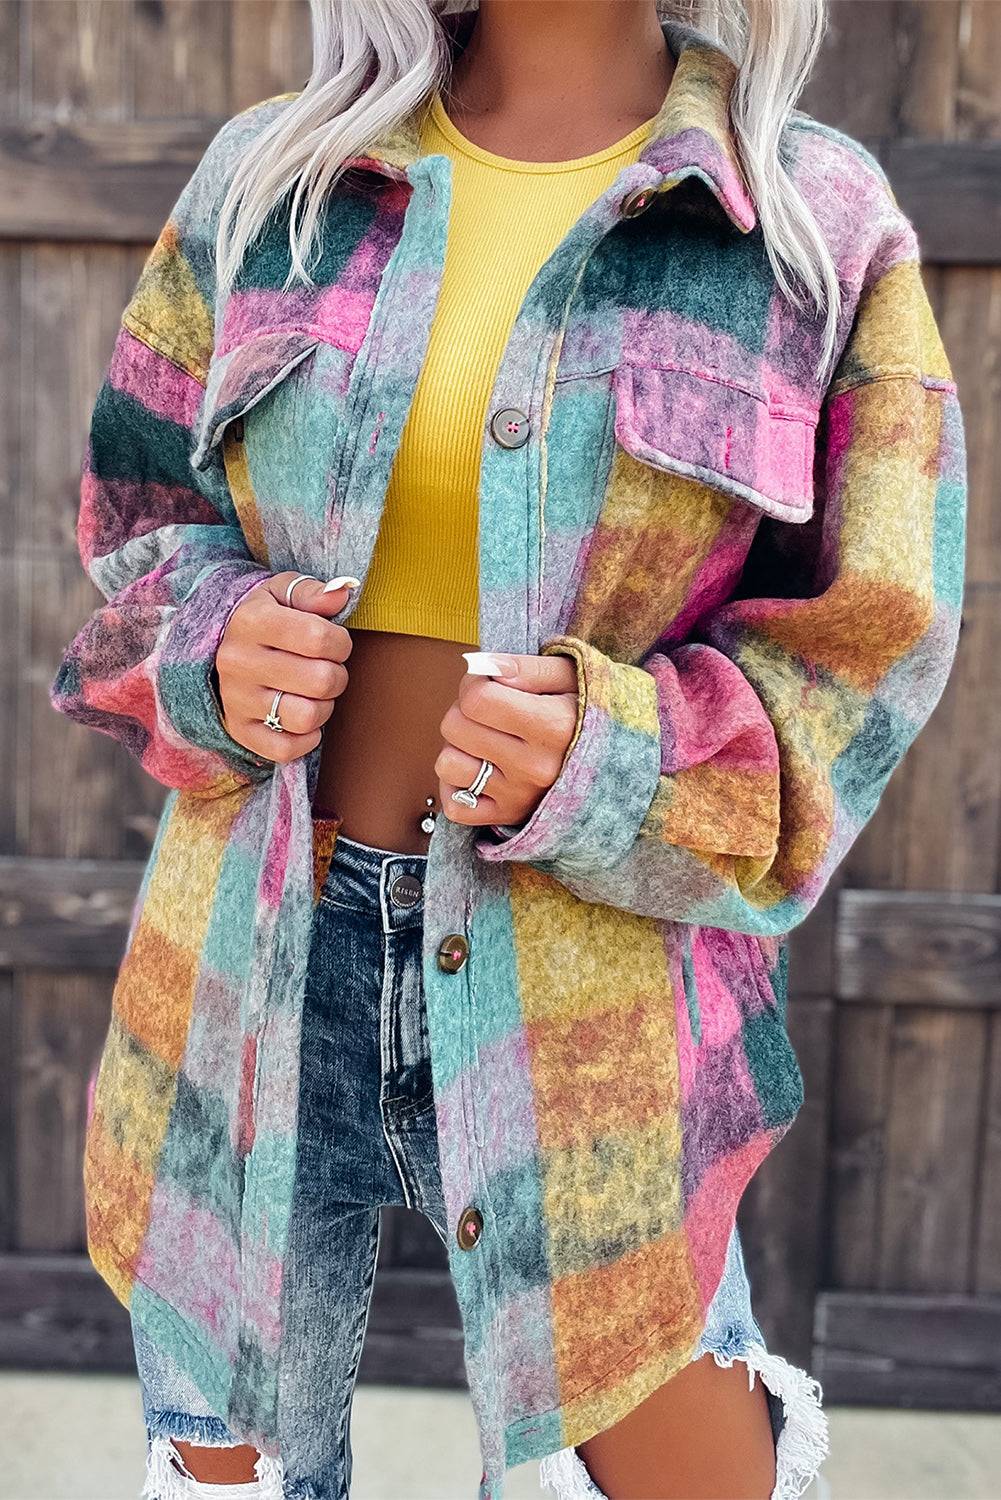 a woman wearing a colorful jacket and ripped jeans